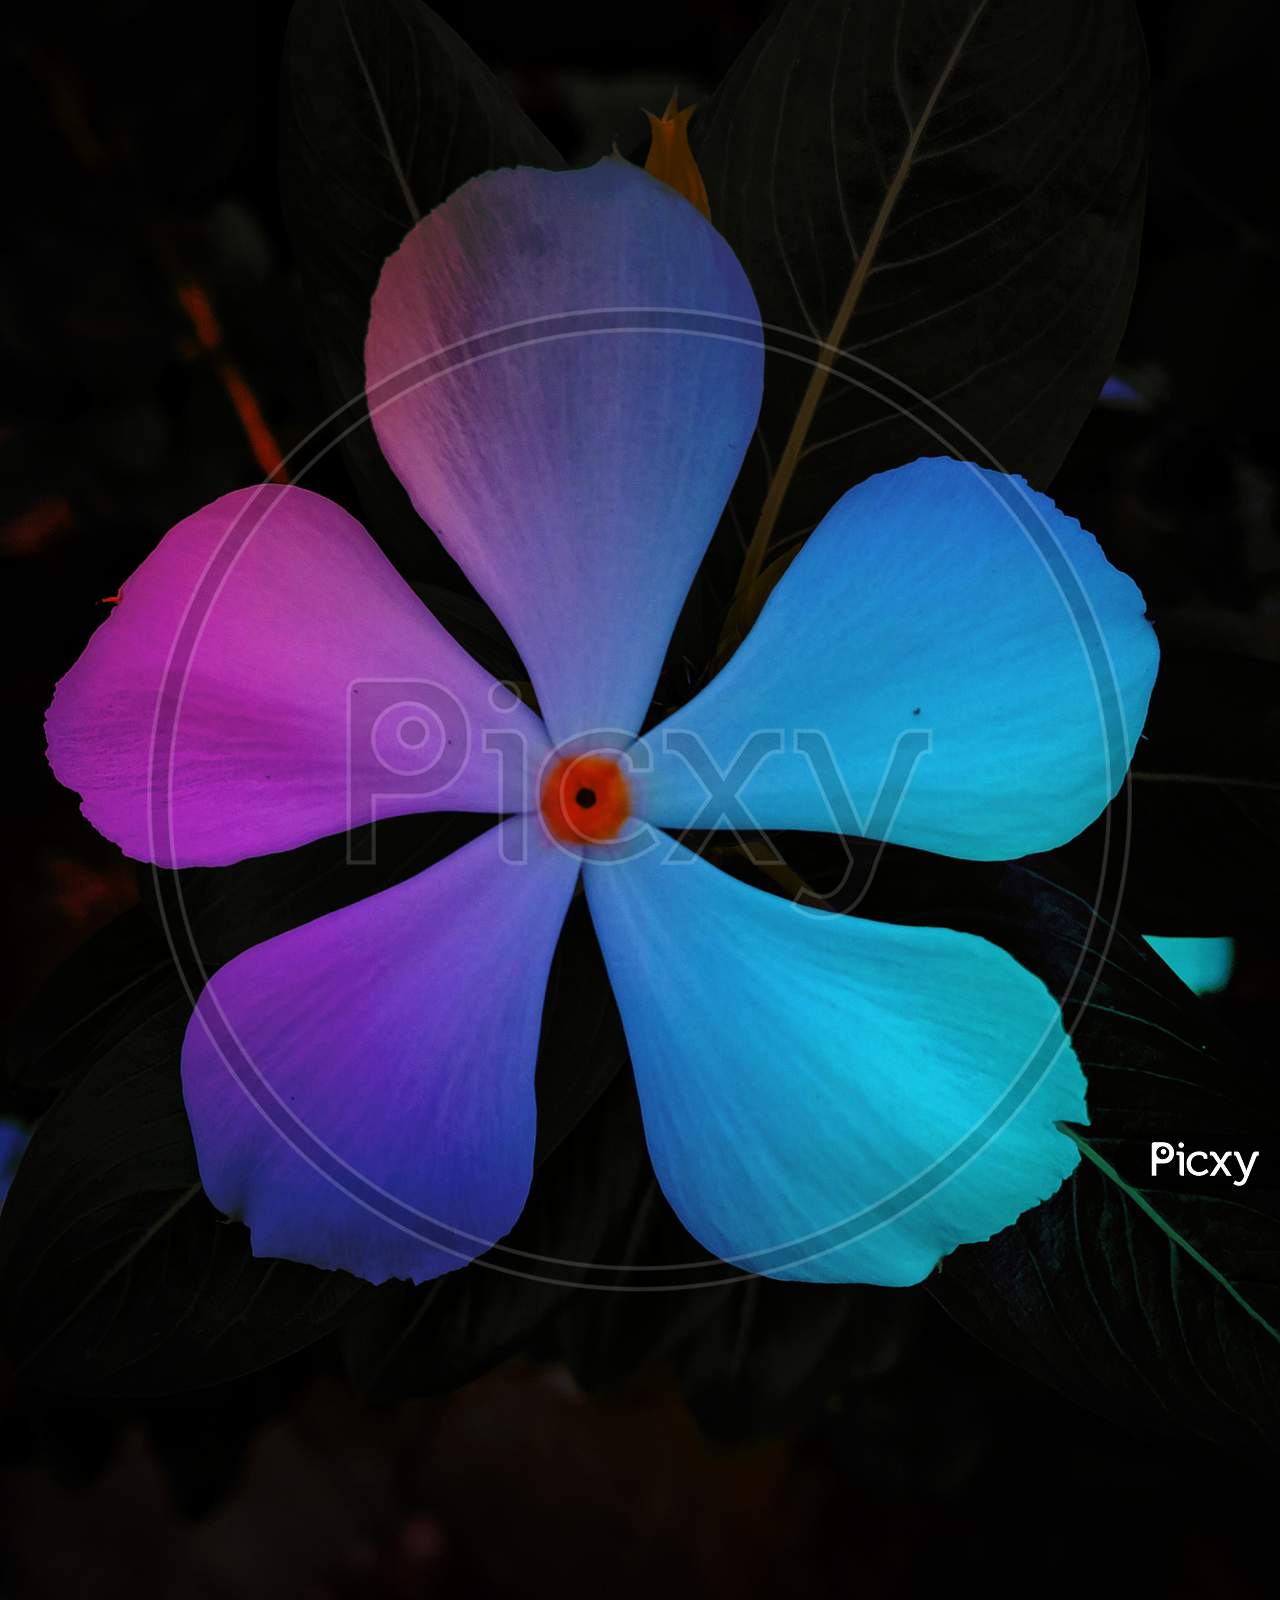 Colourful flower, creative photography